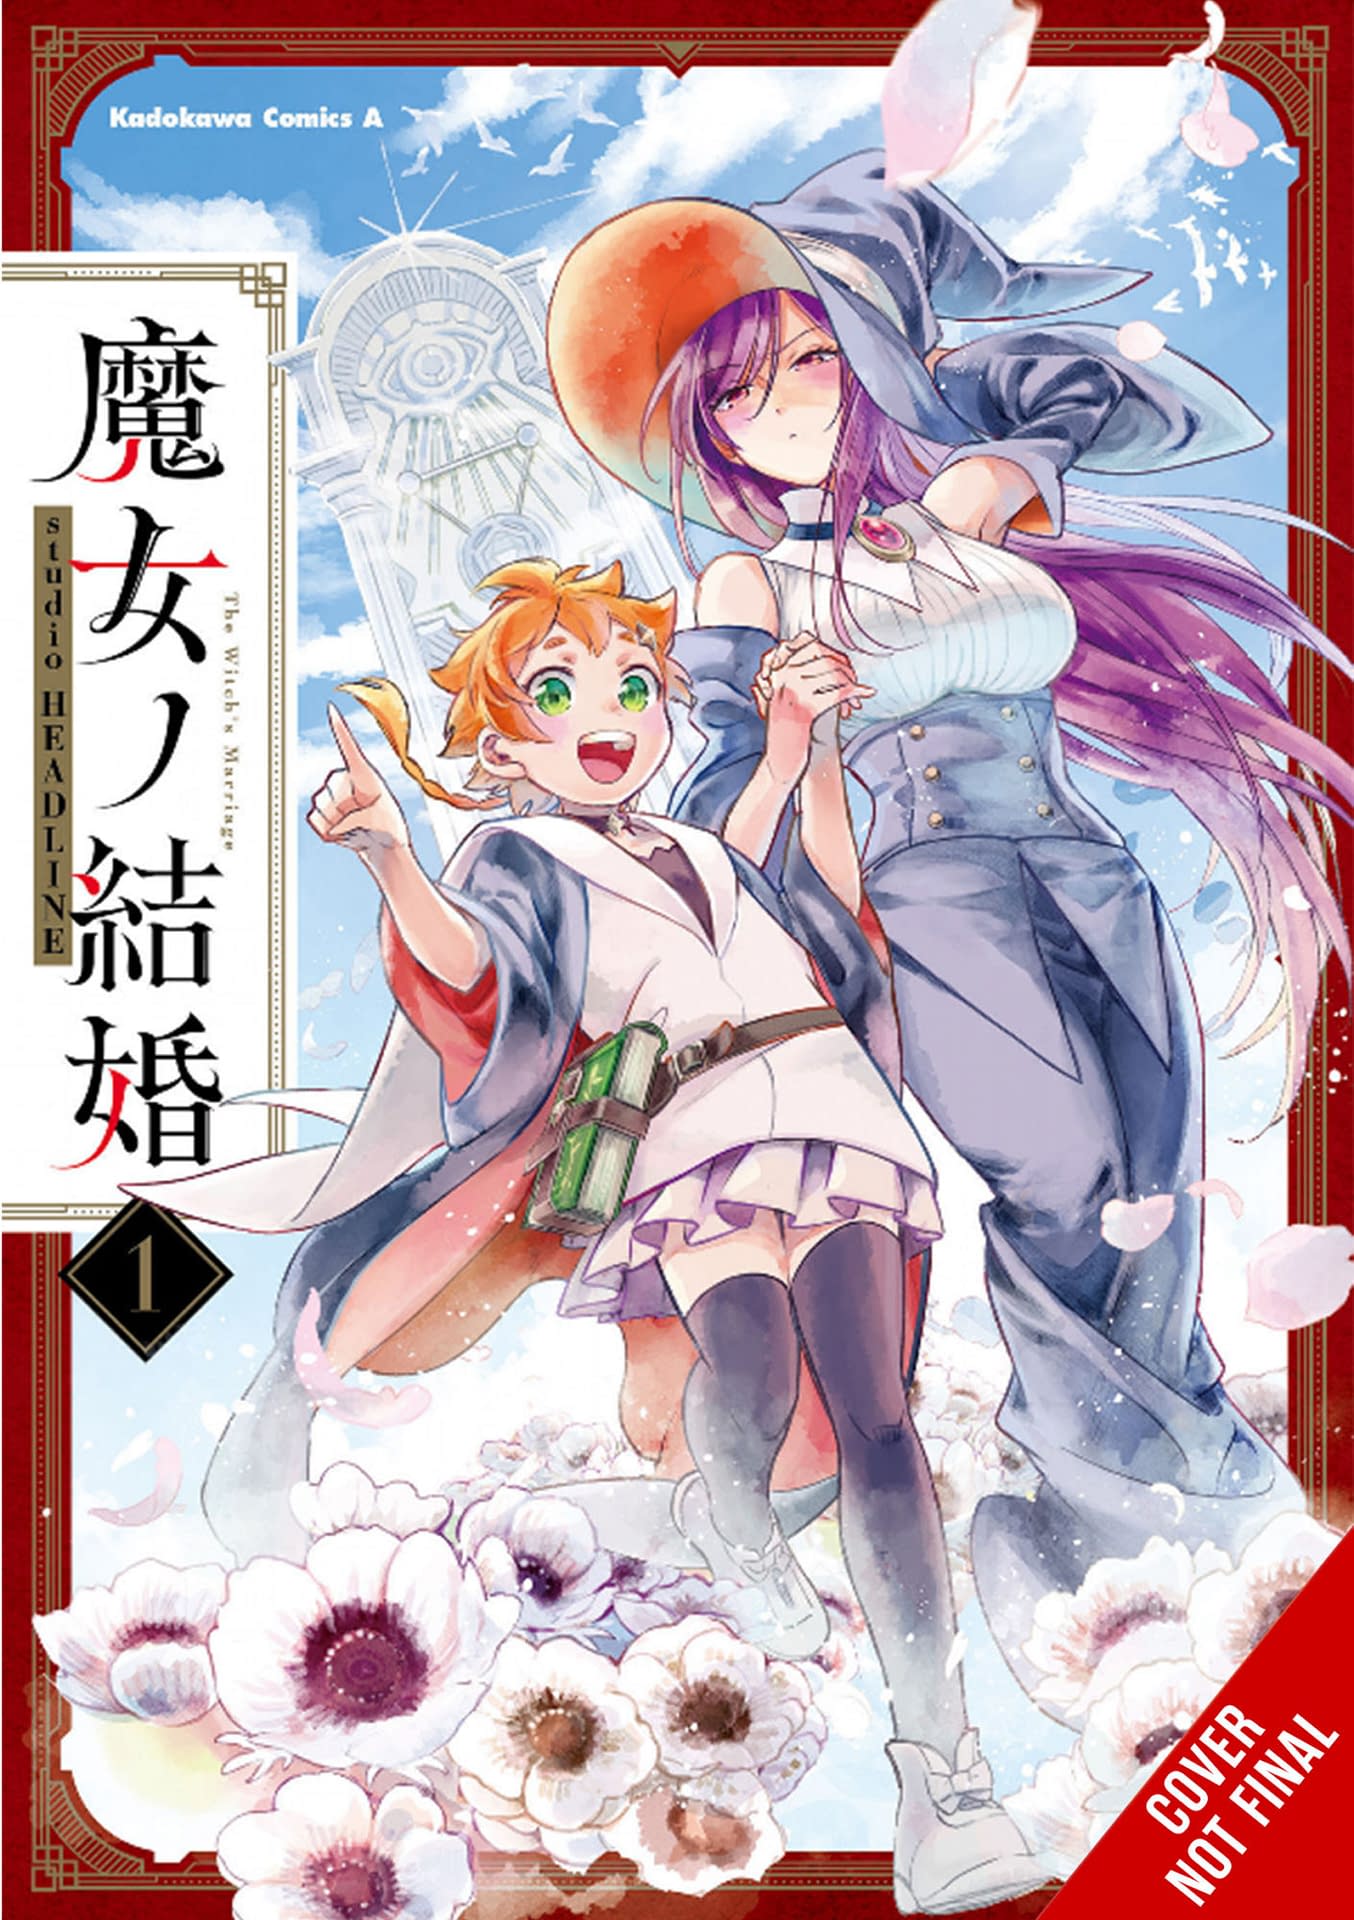 Yen Press on X: After almost a decade in publication, The Devil is a Part-Timer  will soon come to an end. The final volume of the light novel will release  in Japan